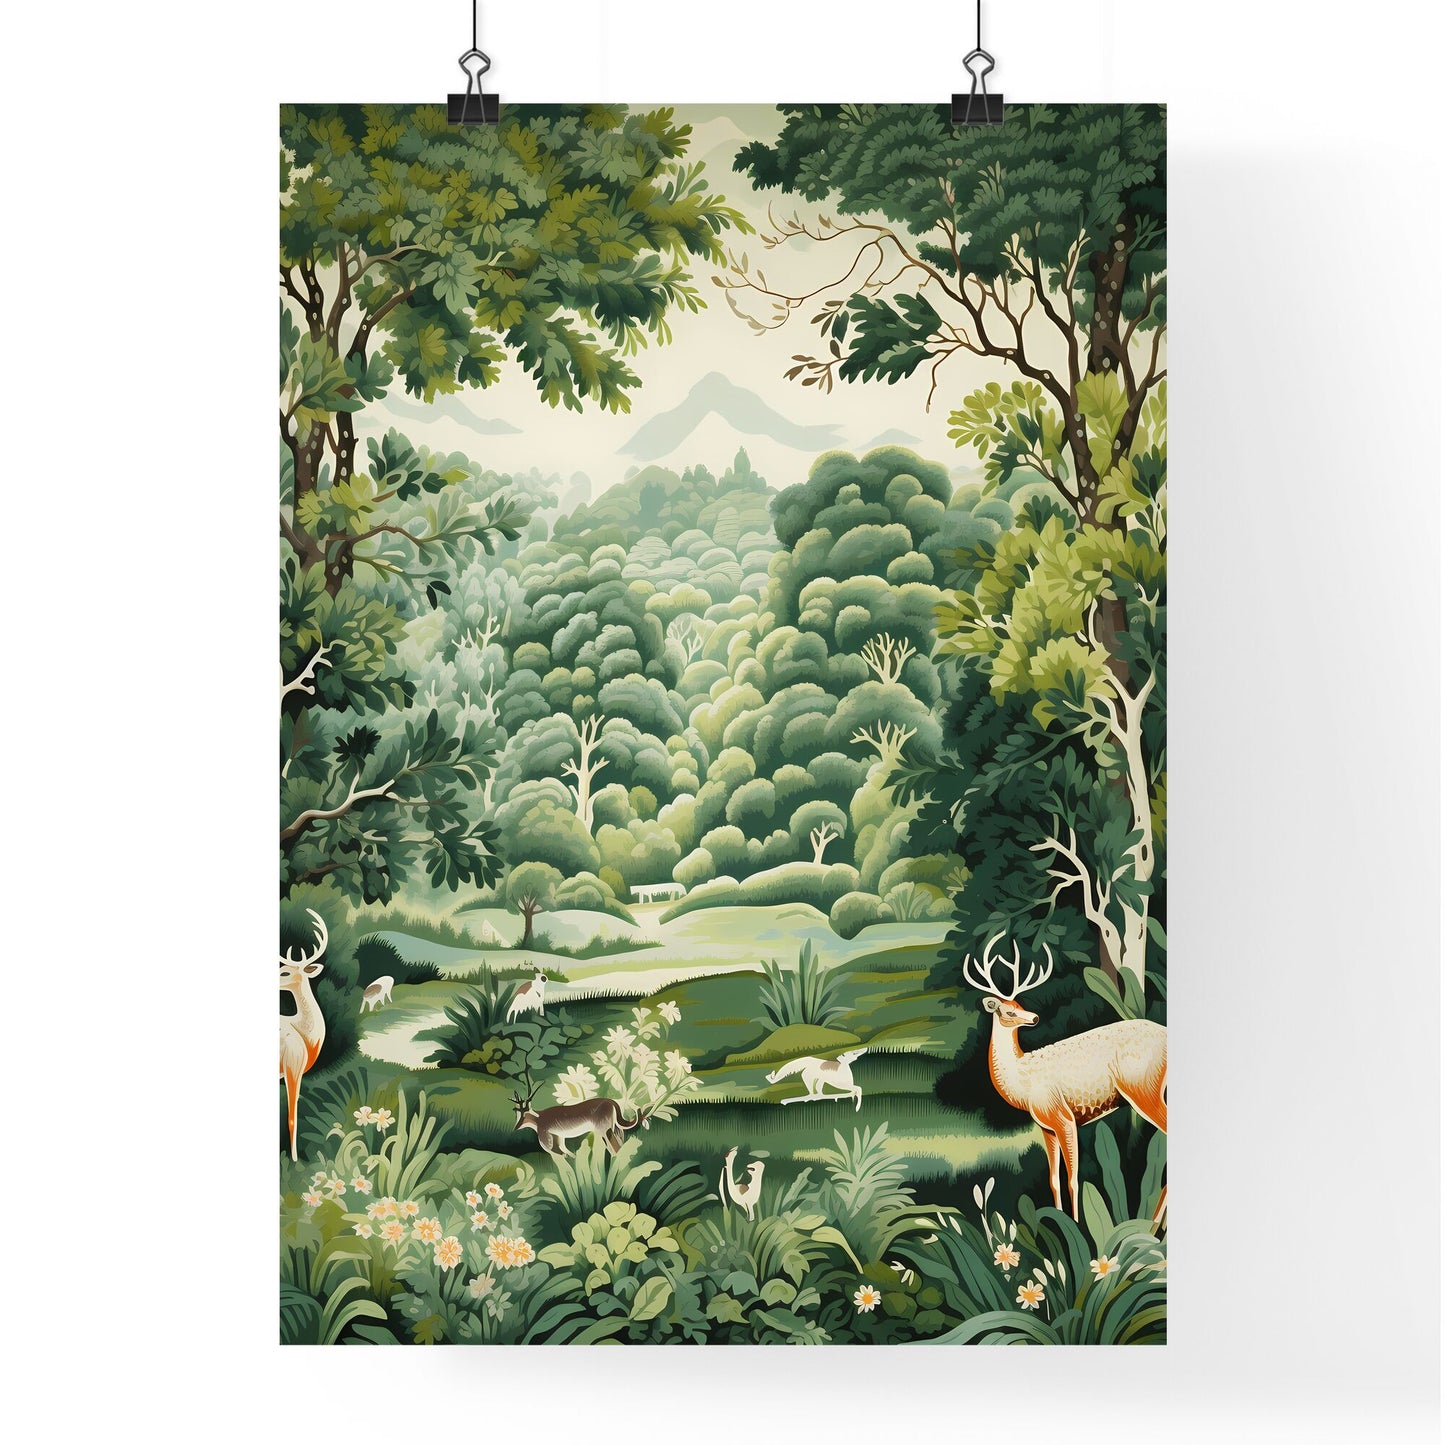 A Poster of green tapestry - A Painting Of A Forest With Deer And Deer Default Title